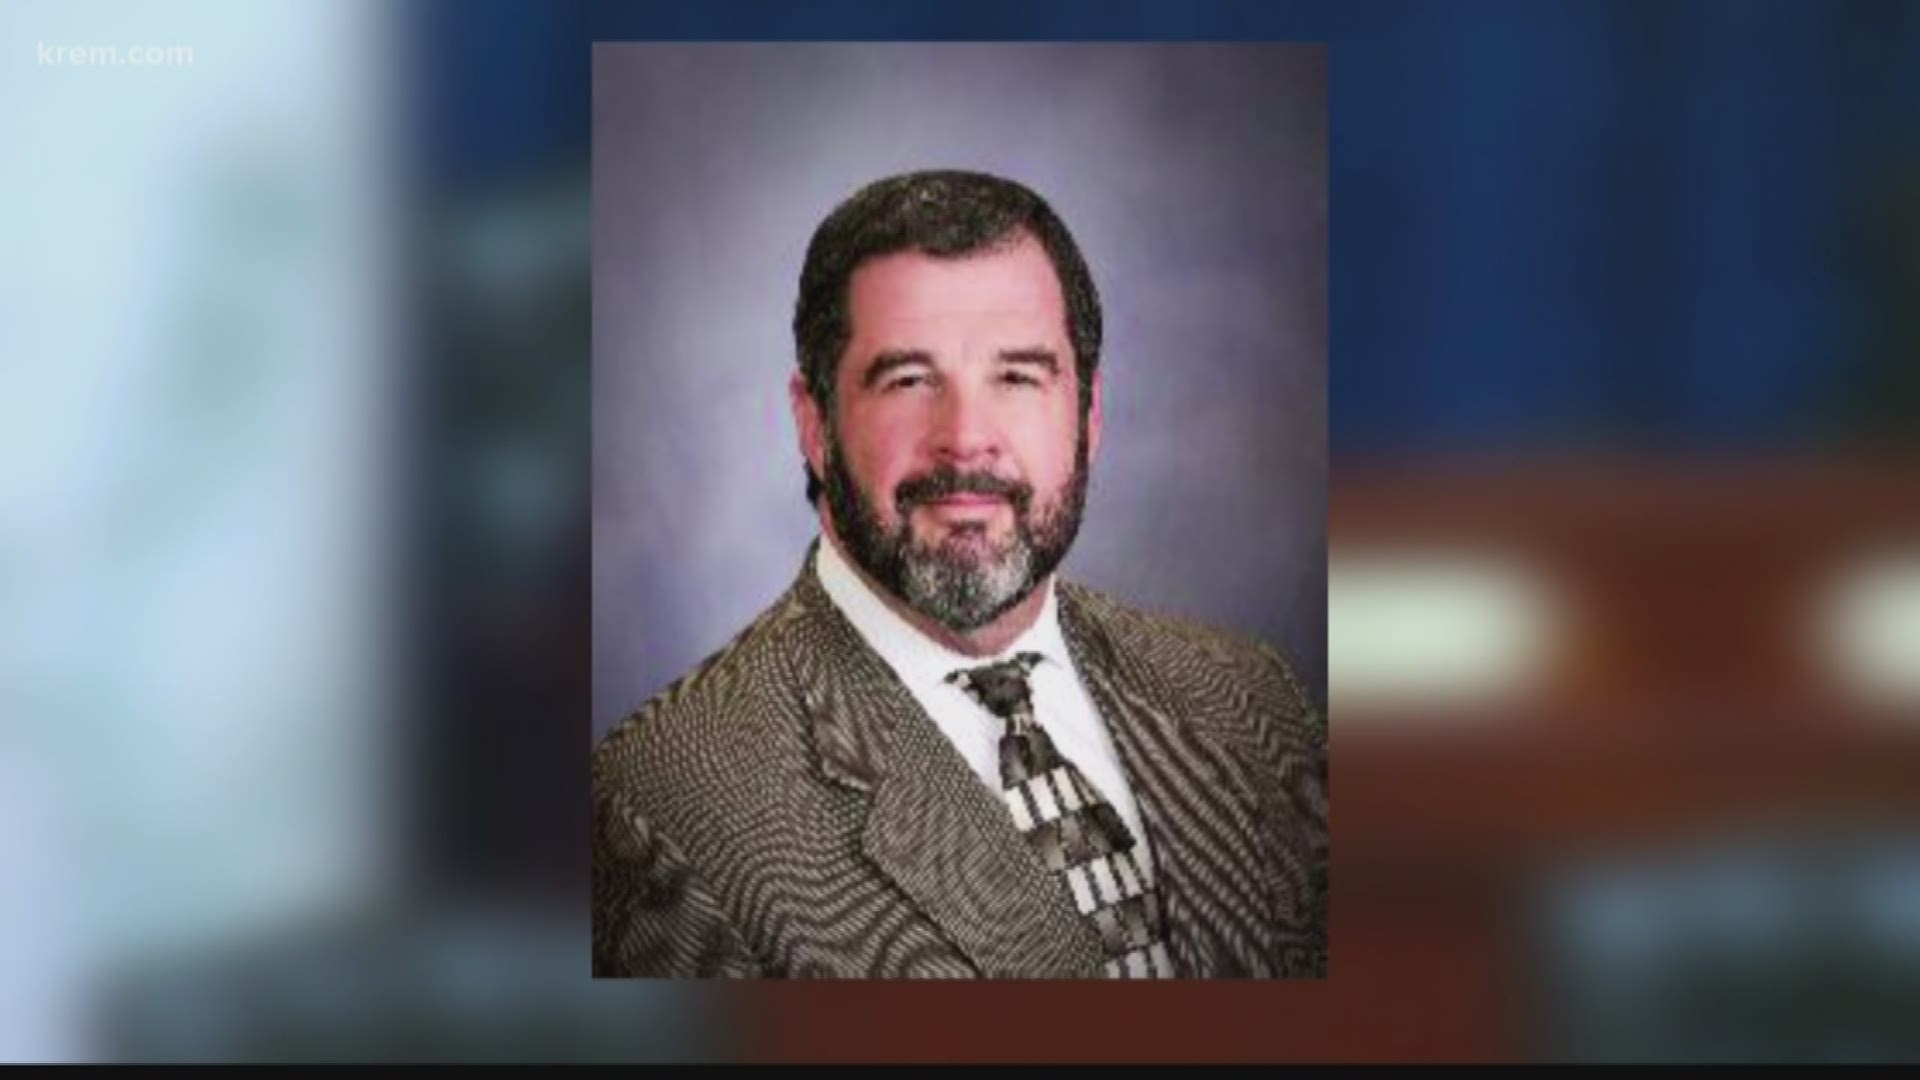 Post Falls Rep. John Green was expelled from the Idaho State House on Thursday. He has been convicted of a felony in Texas.